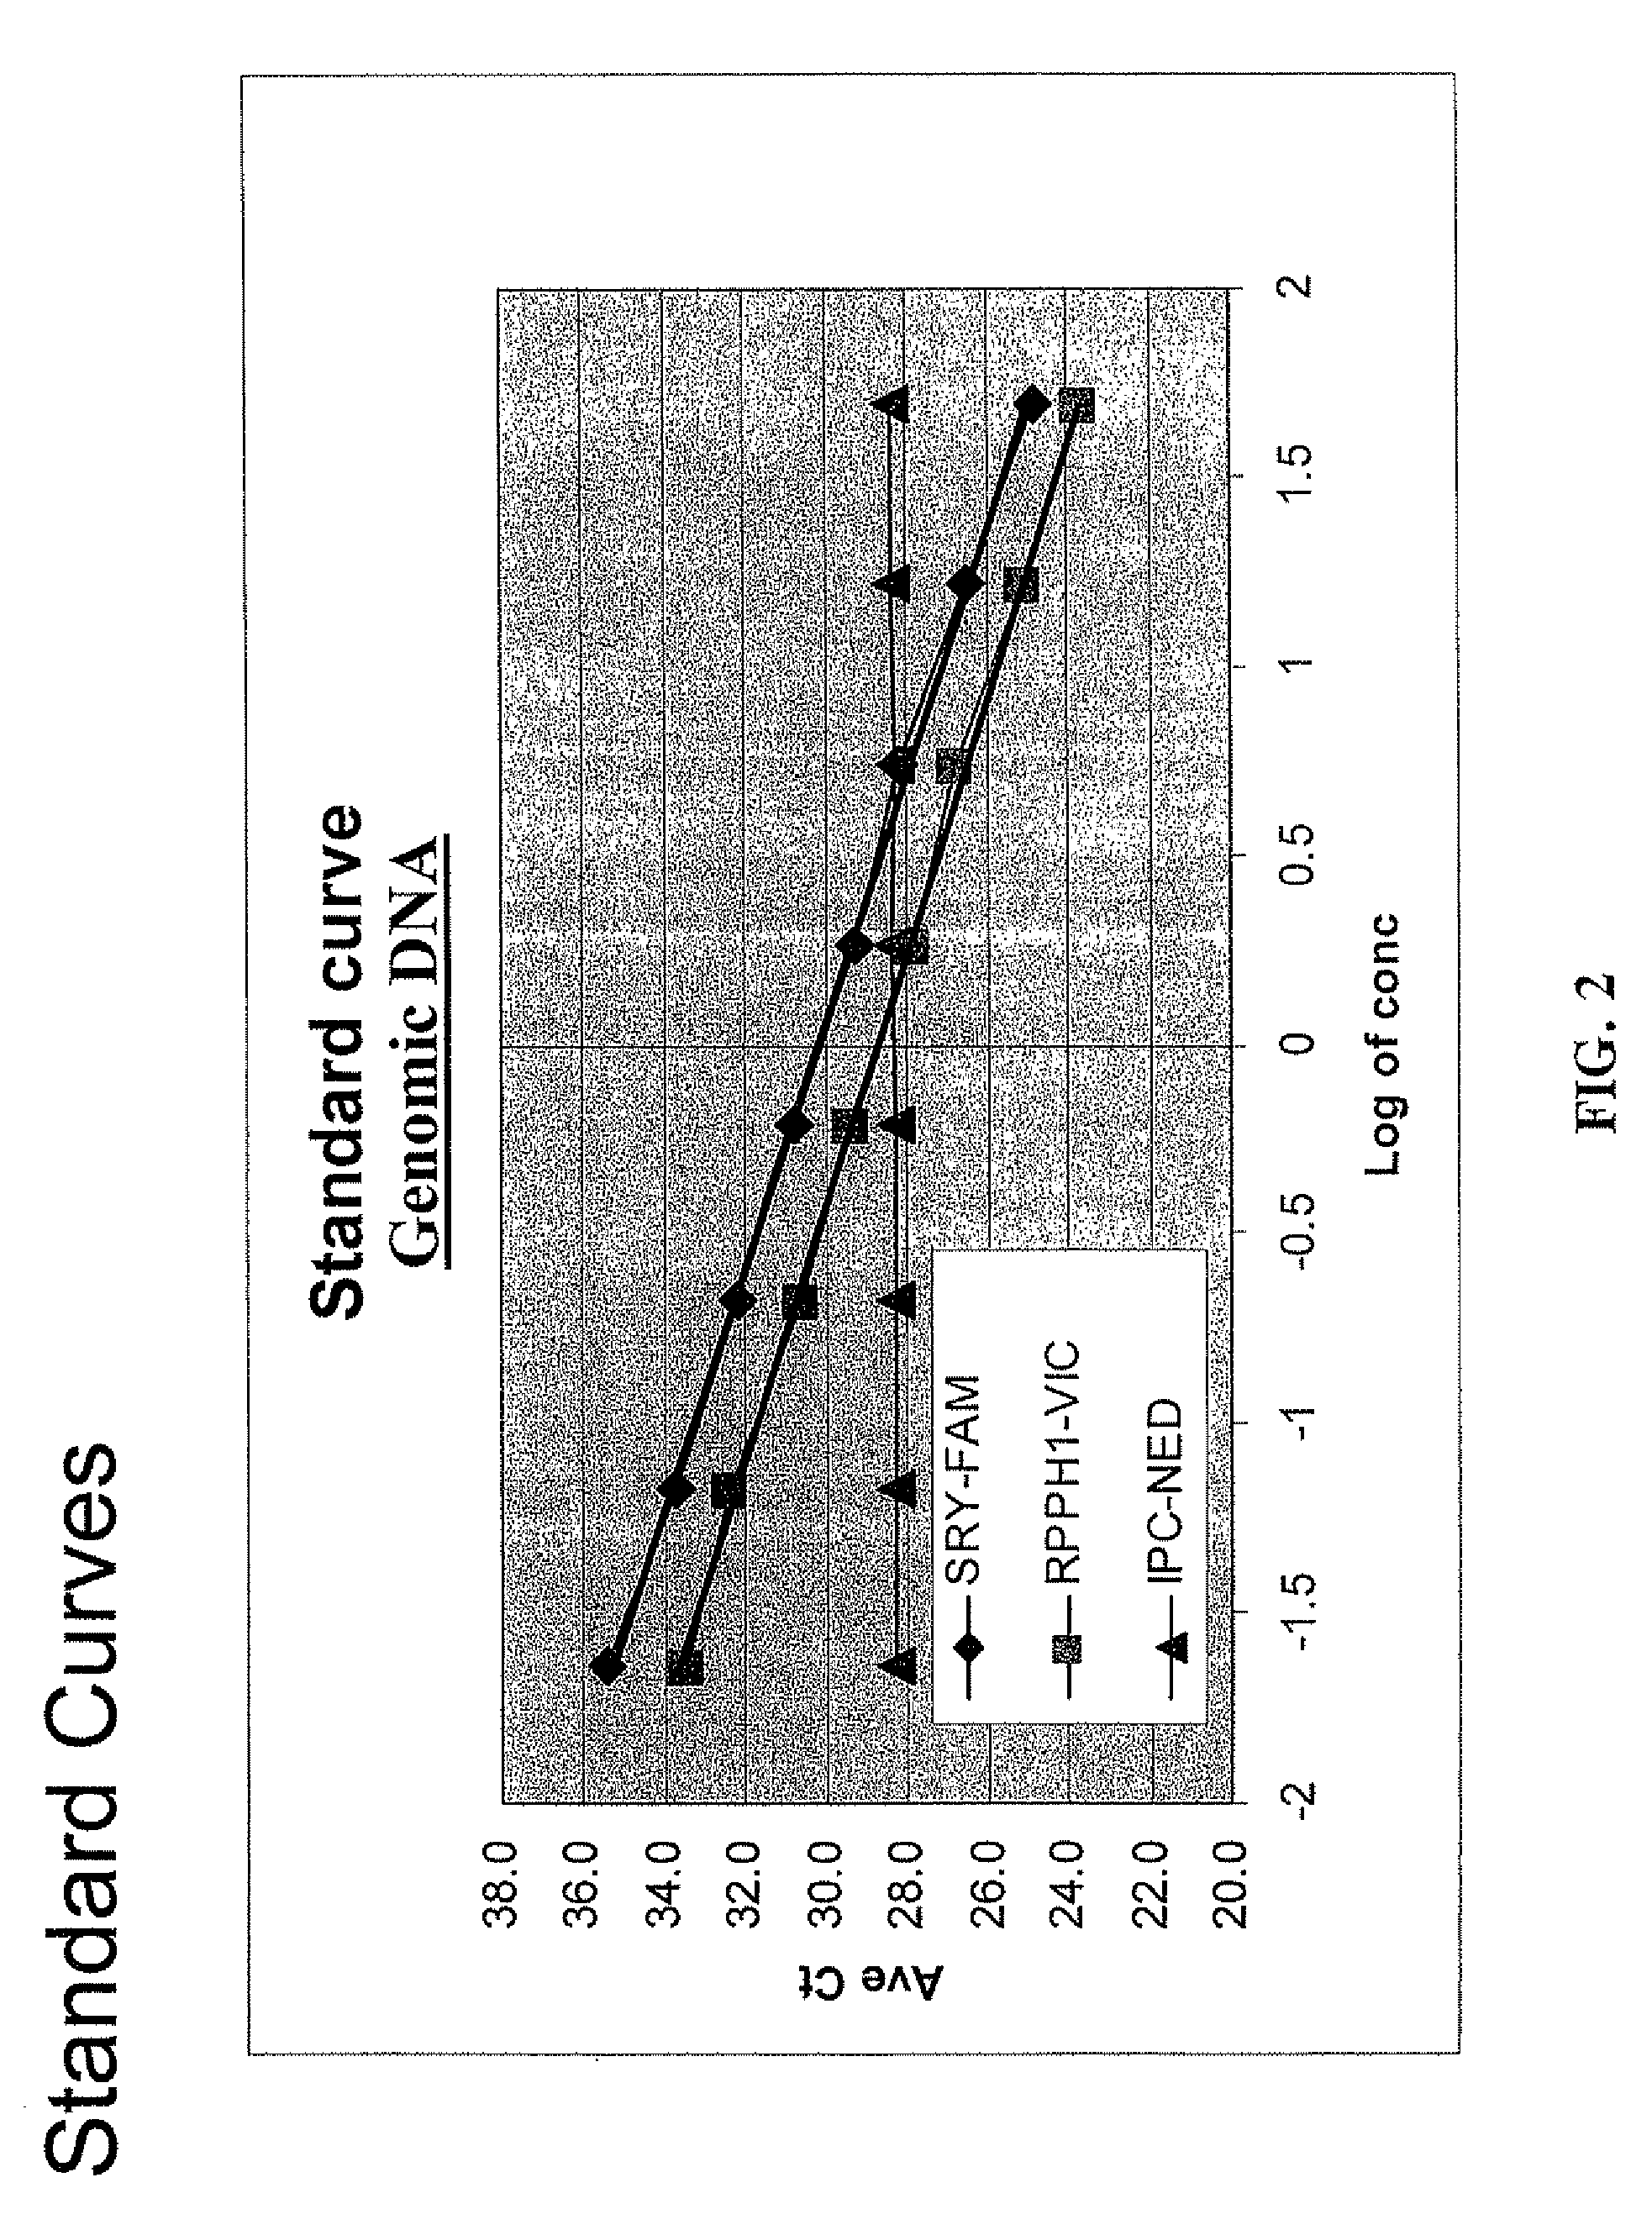 Multiplex compositions and methods for quantification of human nuclear DNA and human male DNA and detection of PCR inhibitors